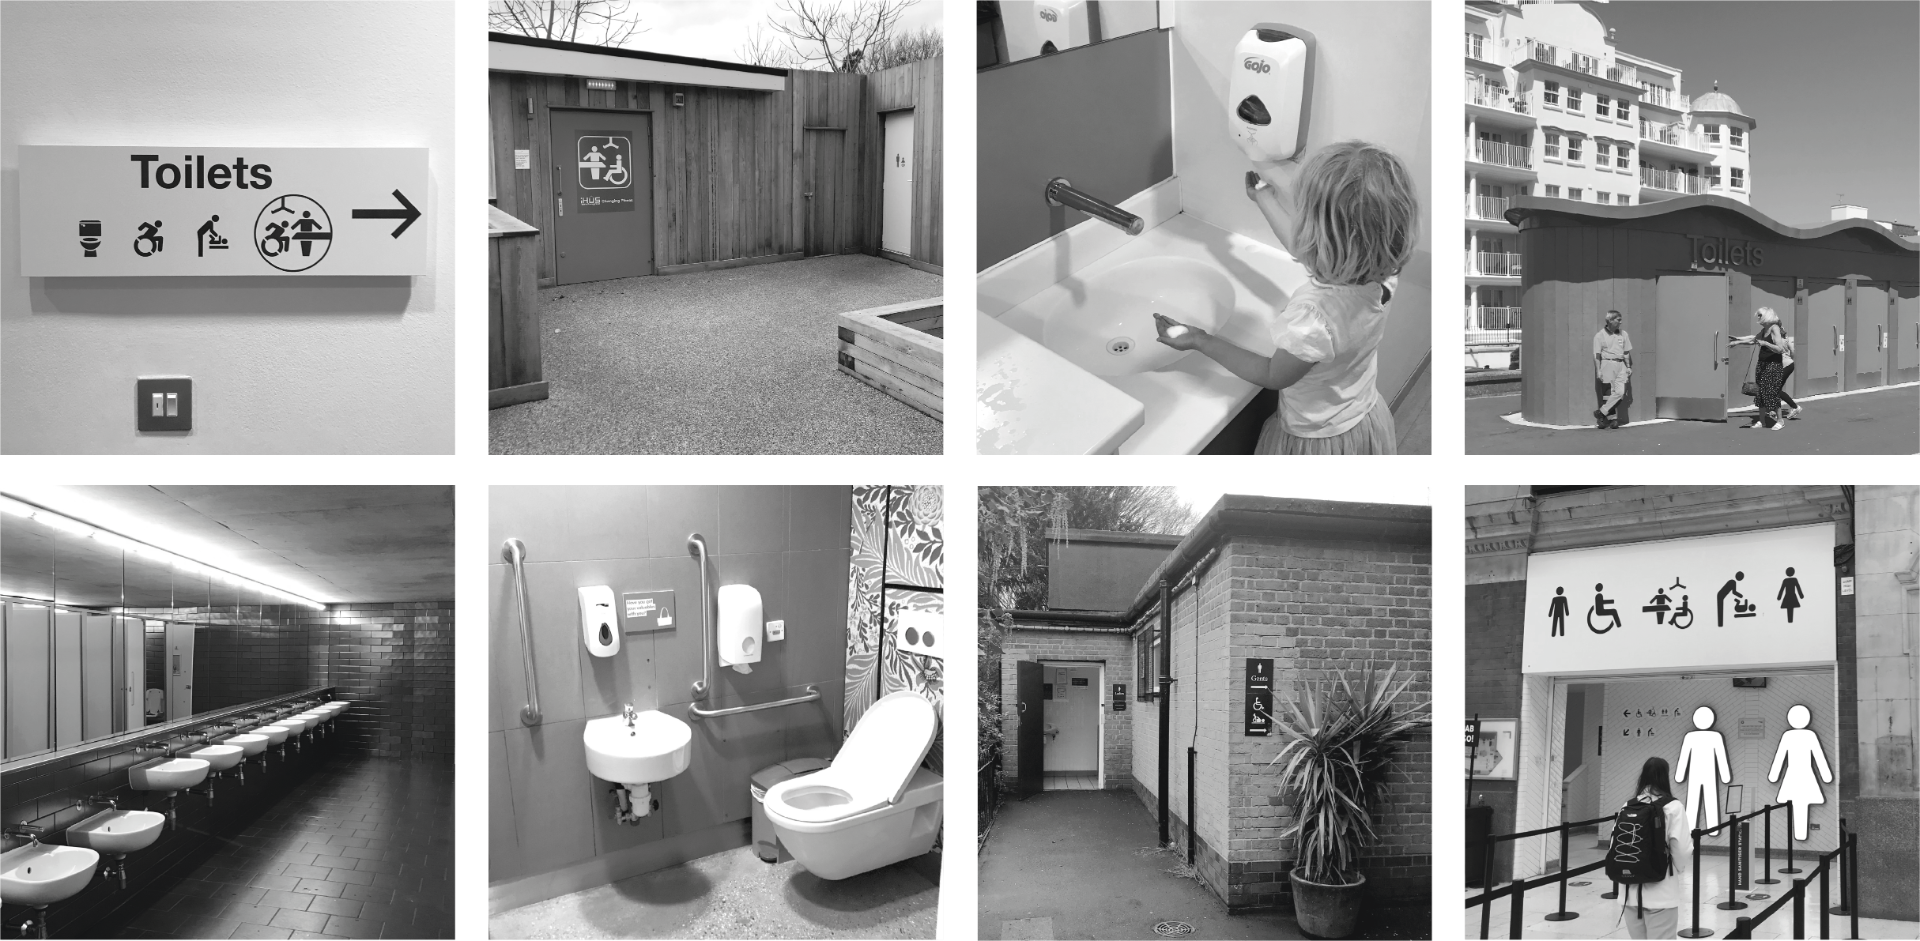 Eight black and white images of toilets showing: inclusive signage, Changing Places, children's sink, seaside toilets, row of sinks, accessible toilet, park toilet, station signage